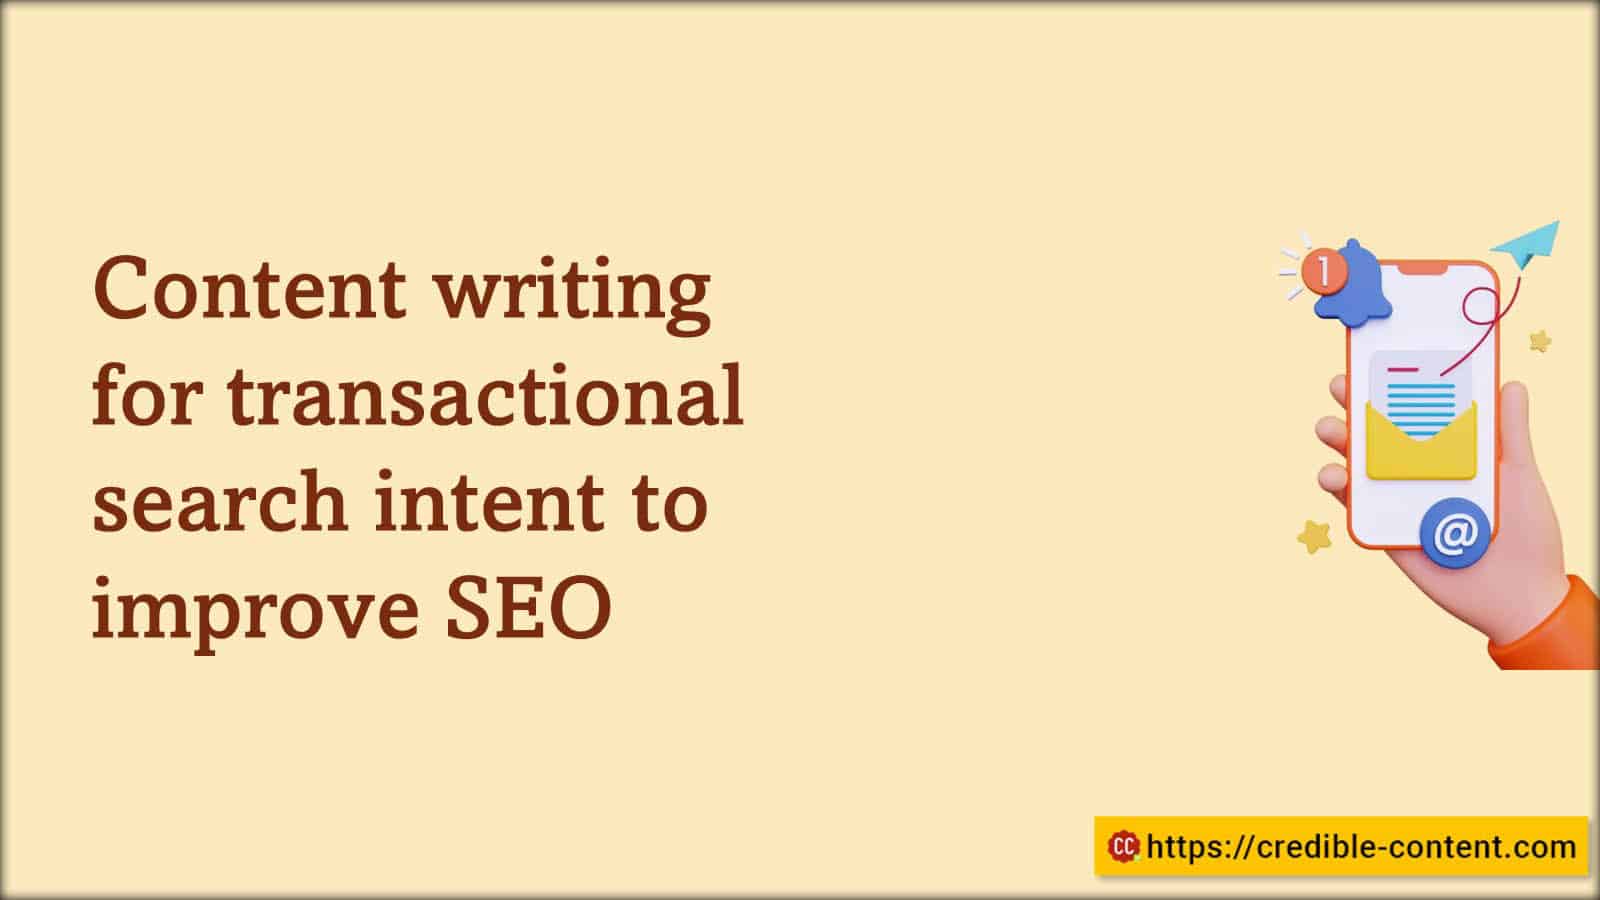 Content writing for transactional search intent to improve SEO